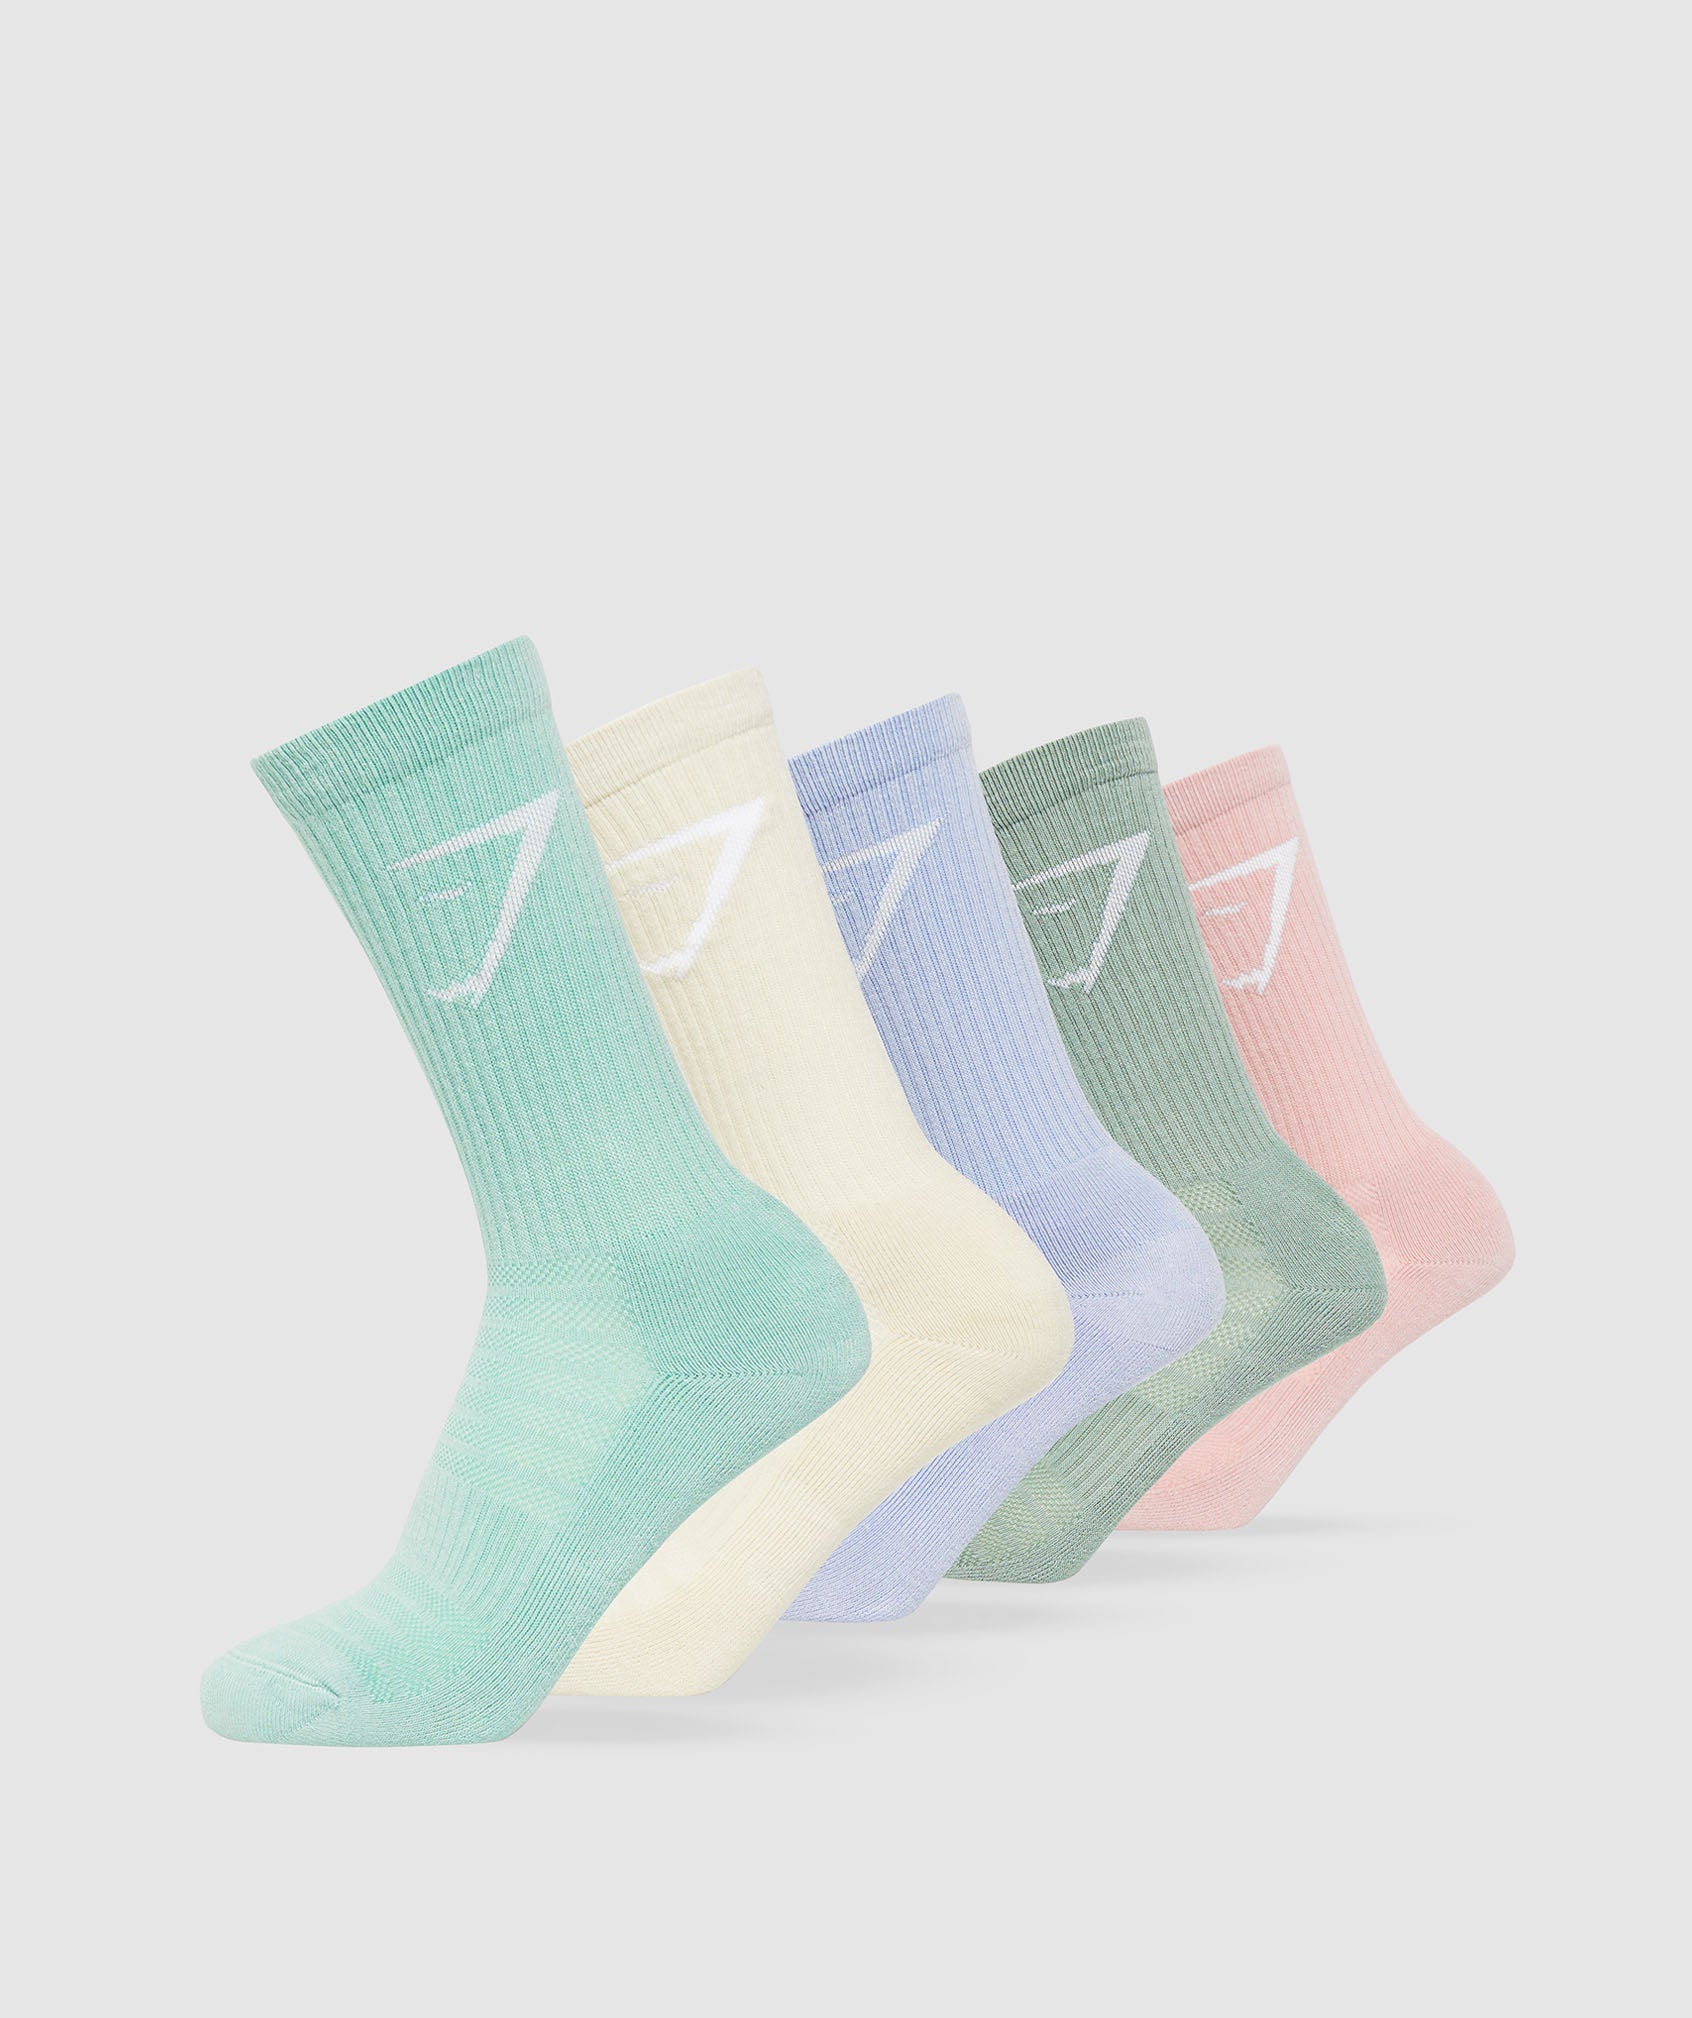 Crew Socks 5pk in White/Pink/Green/Lilac/Green - view 1